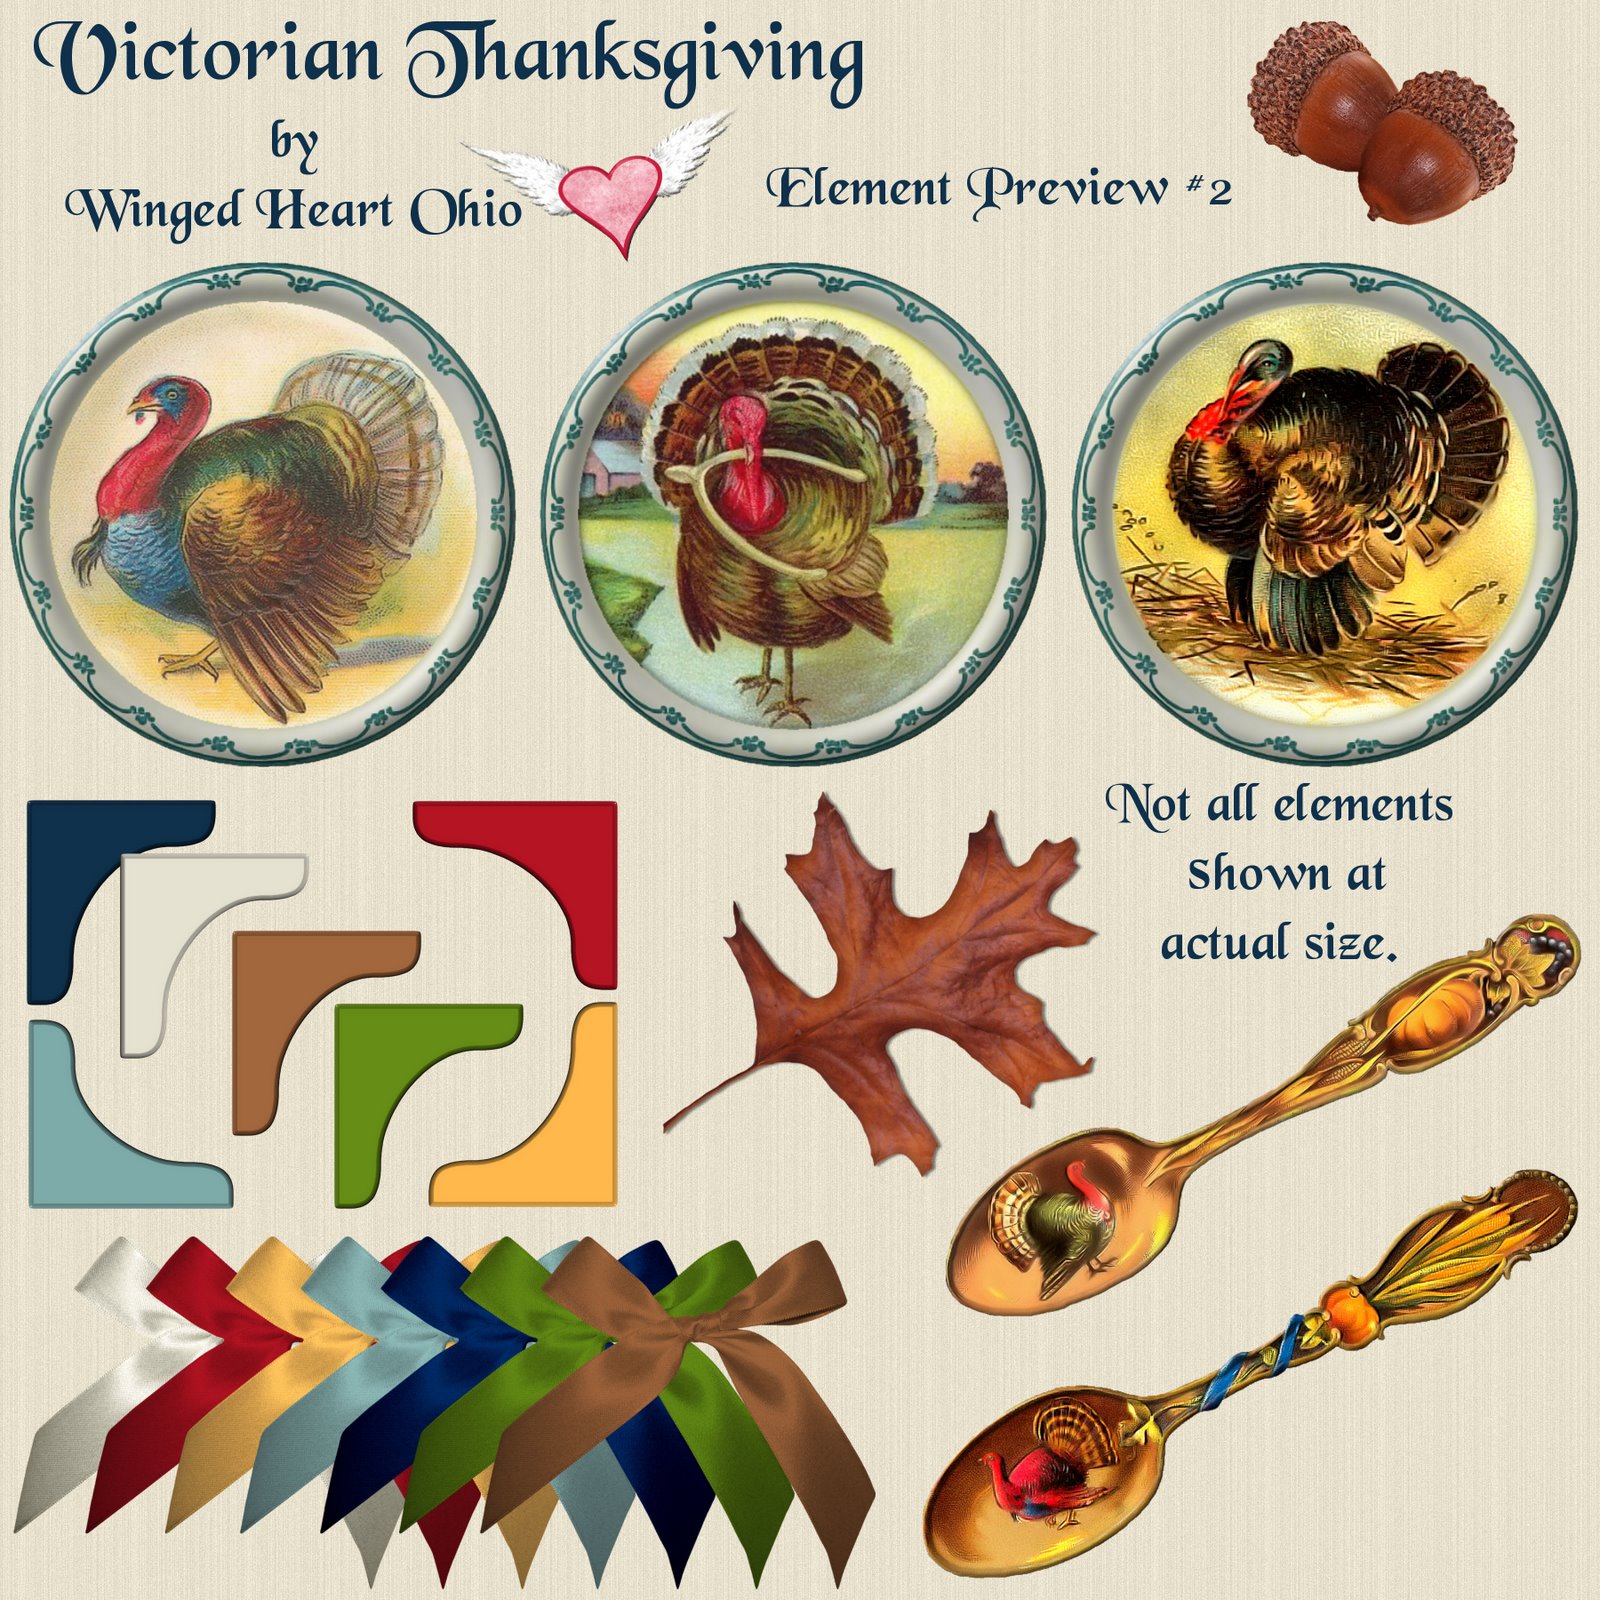 [WH_VictorianThanksgiving_element+preview2.jpg]